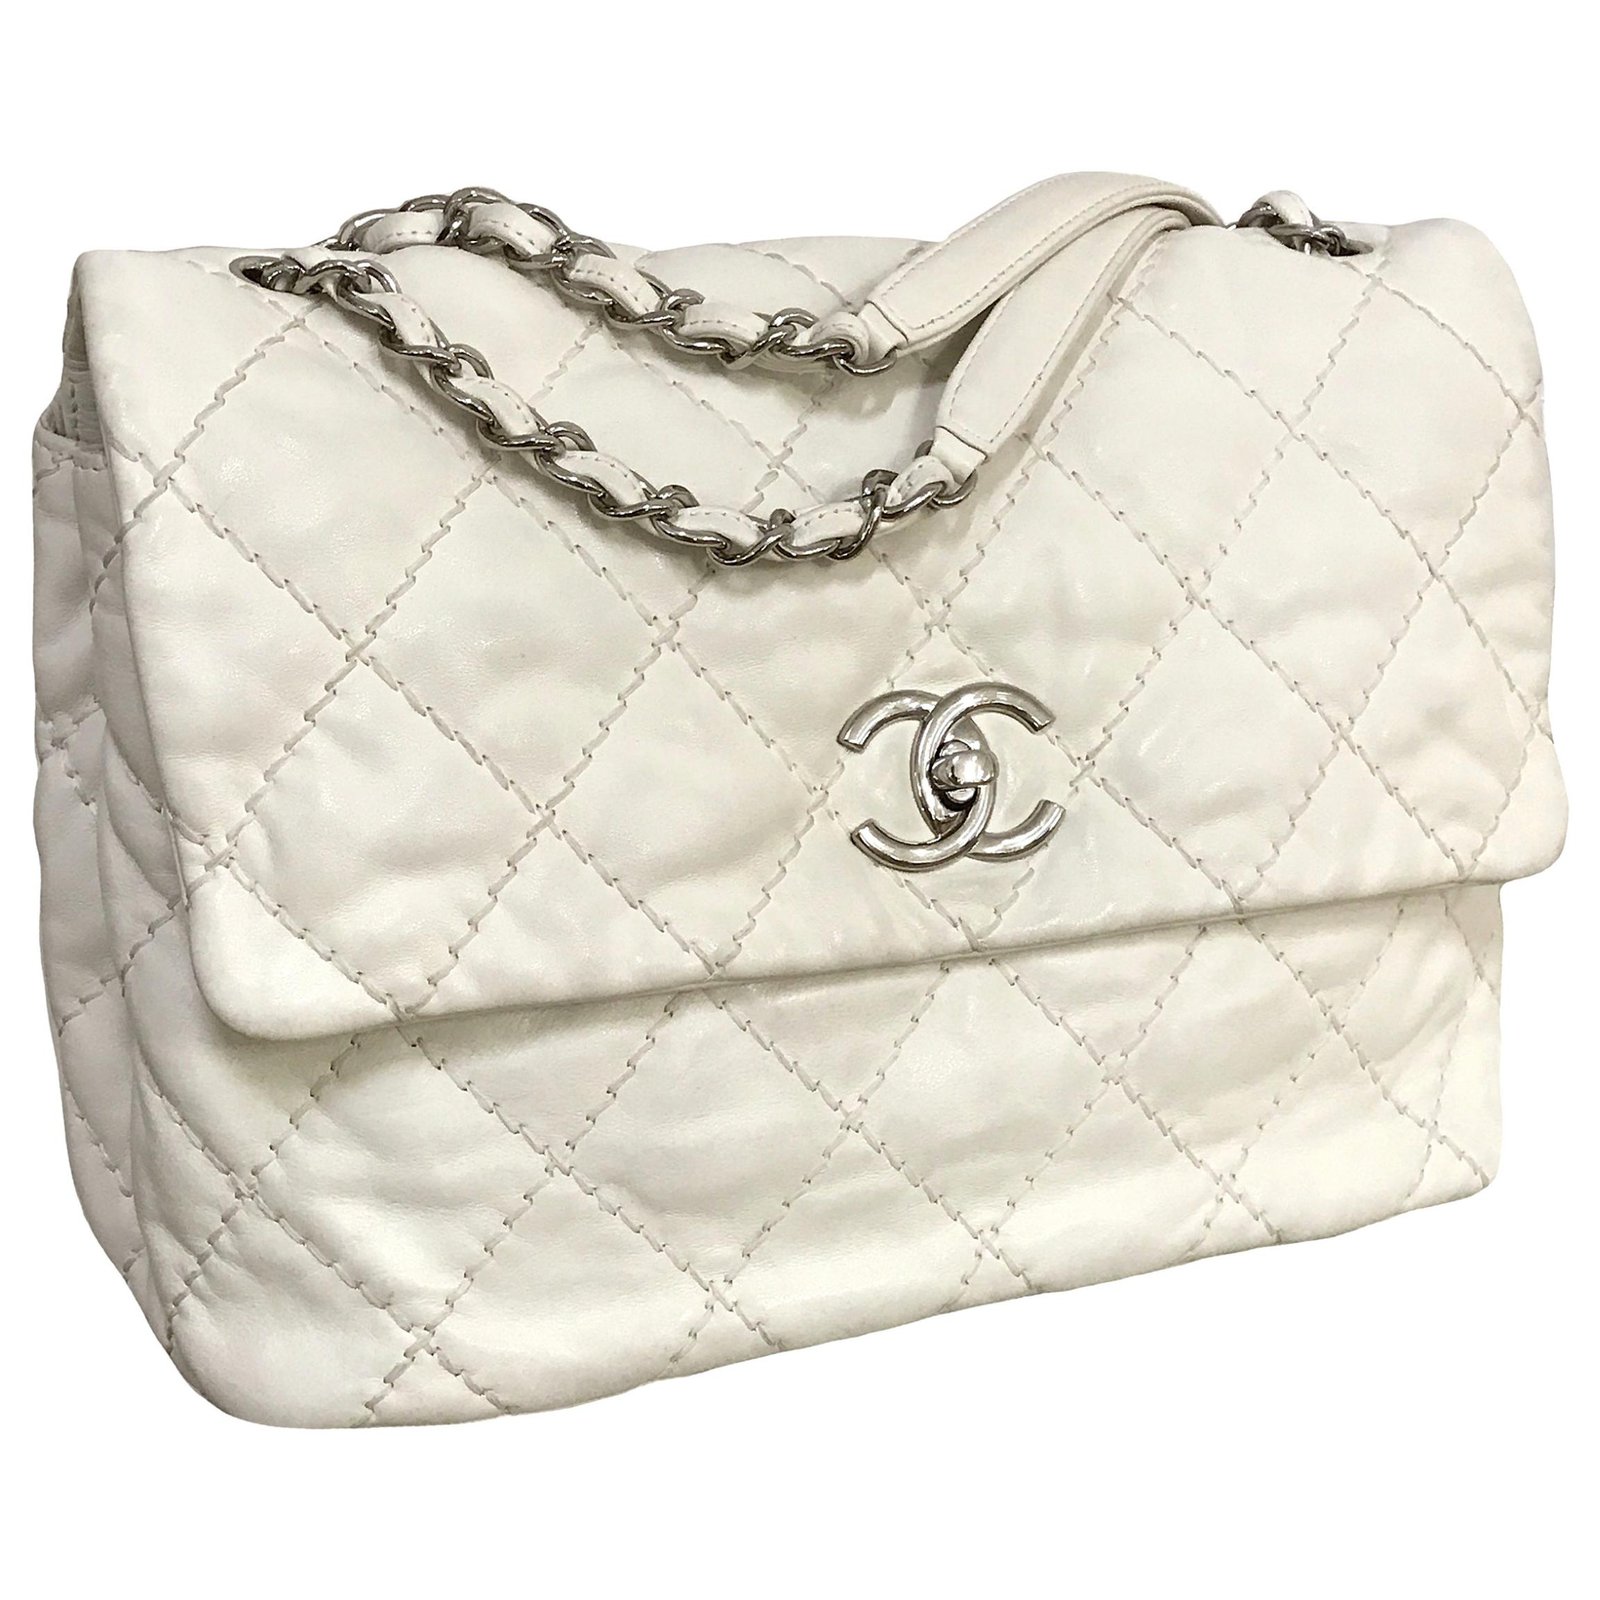 Maxi Timeless Flap Bag with Chanel Box Beige Cream Leather ref